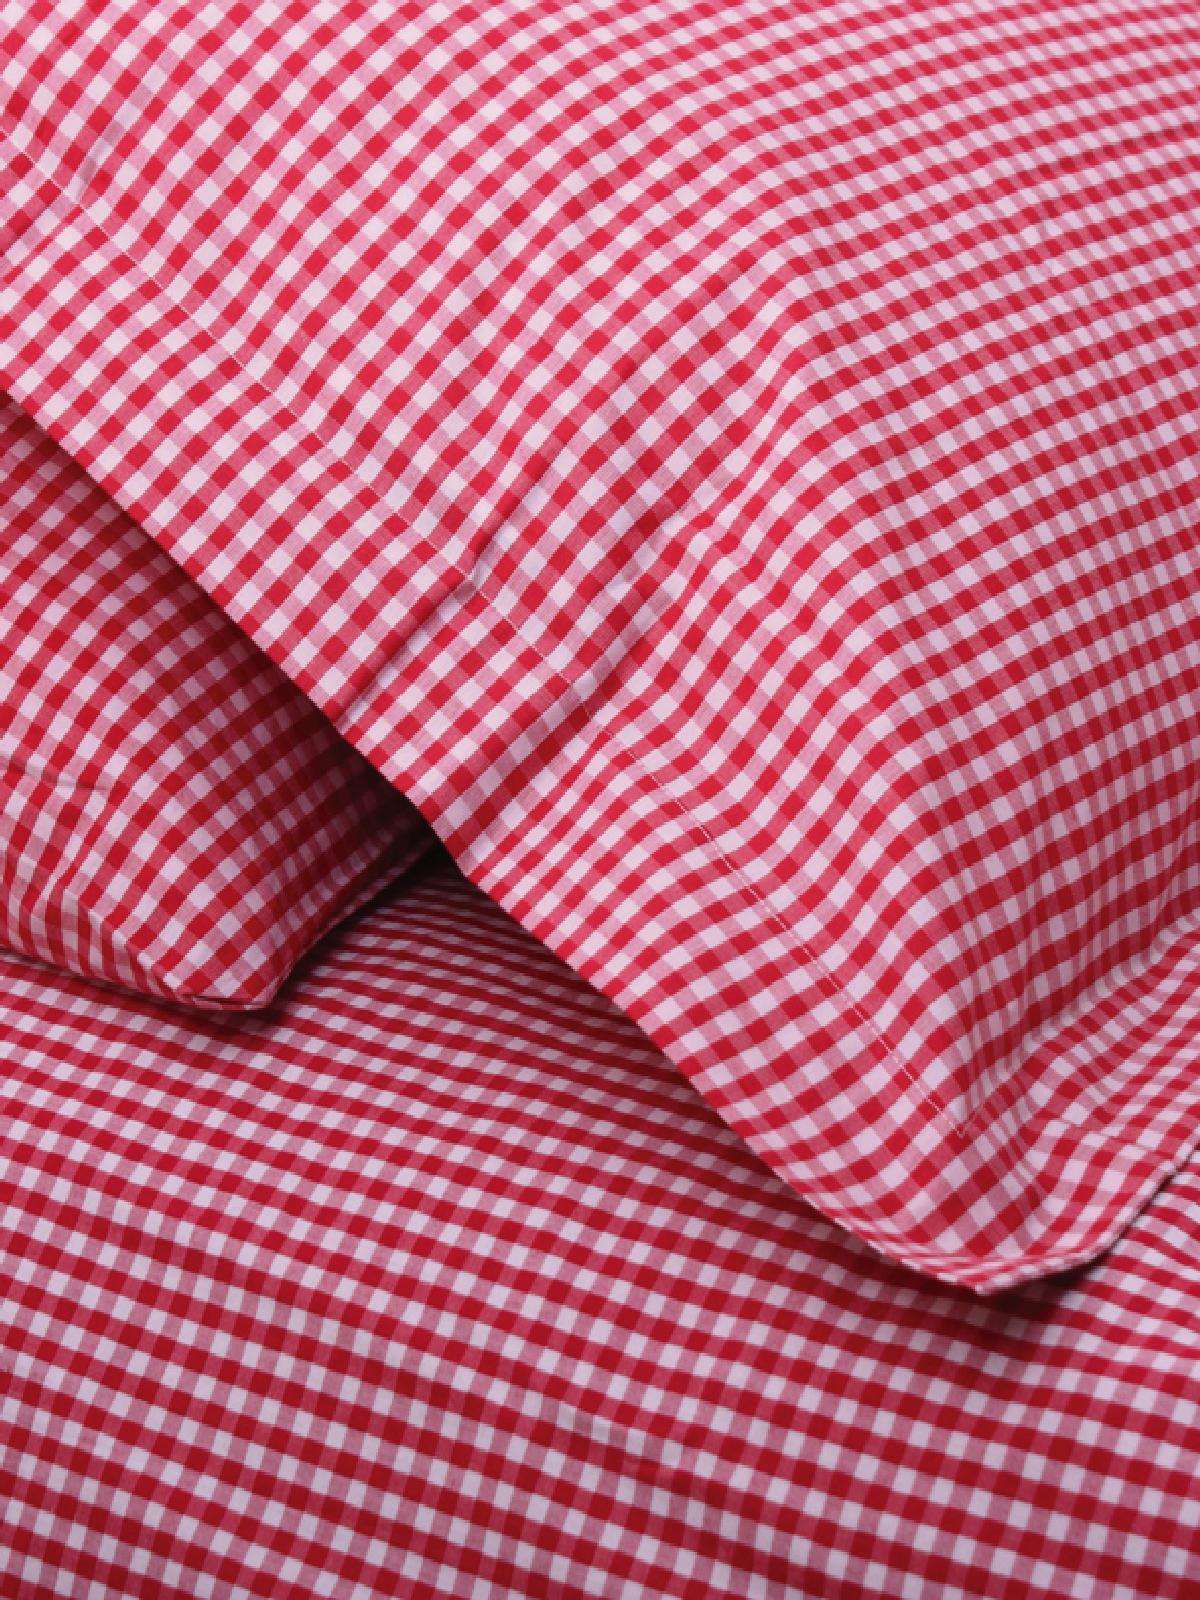 Red Gingham Wallpaper HD And Pictures